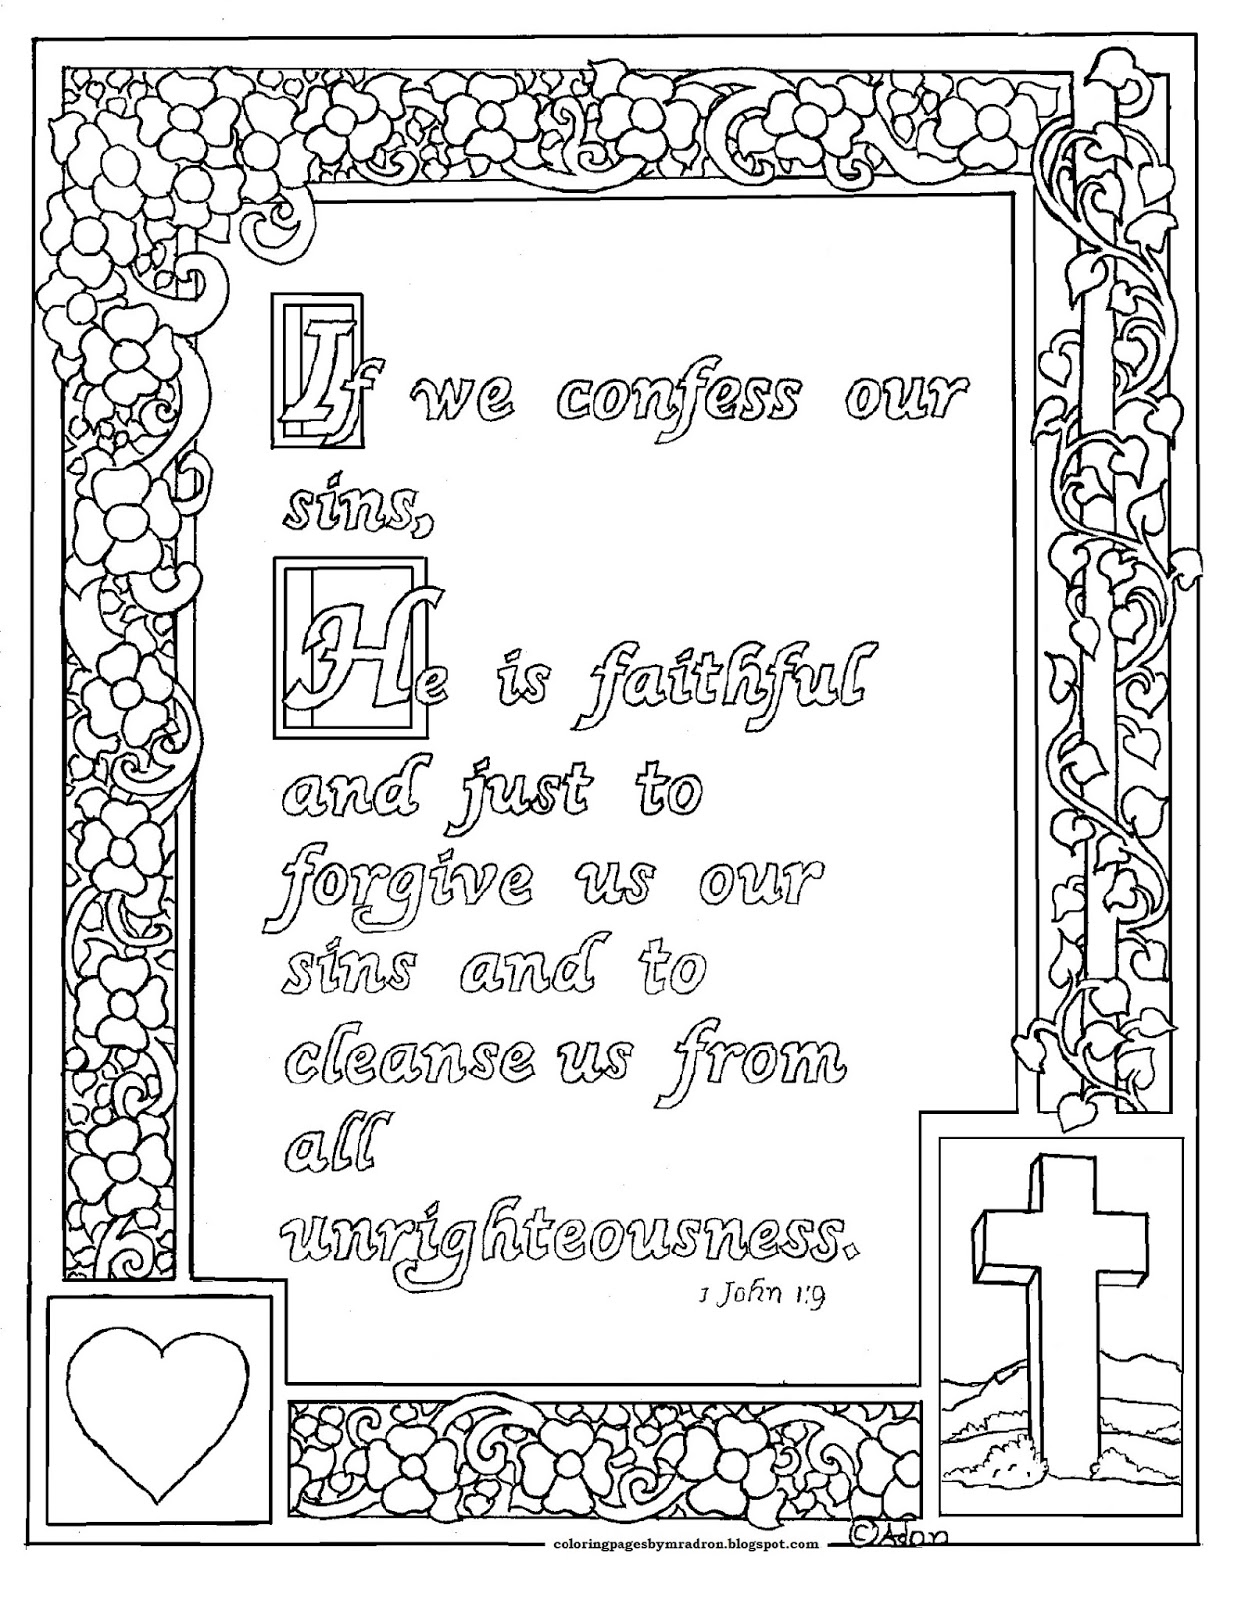 Download Coloring Pages for Kids by Mr. Adron: 1 John 1:9 Print and Color Page